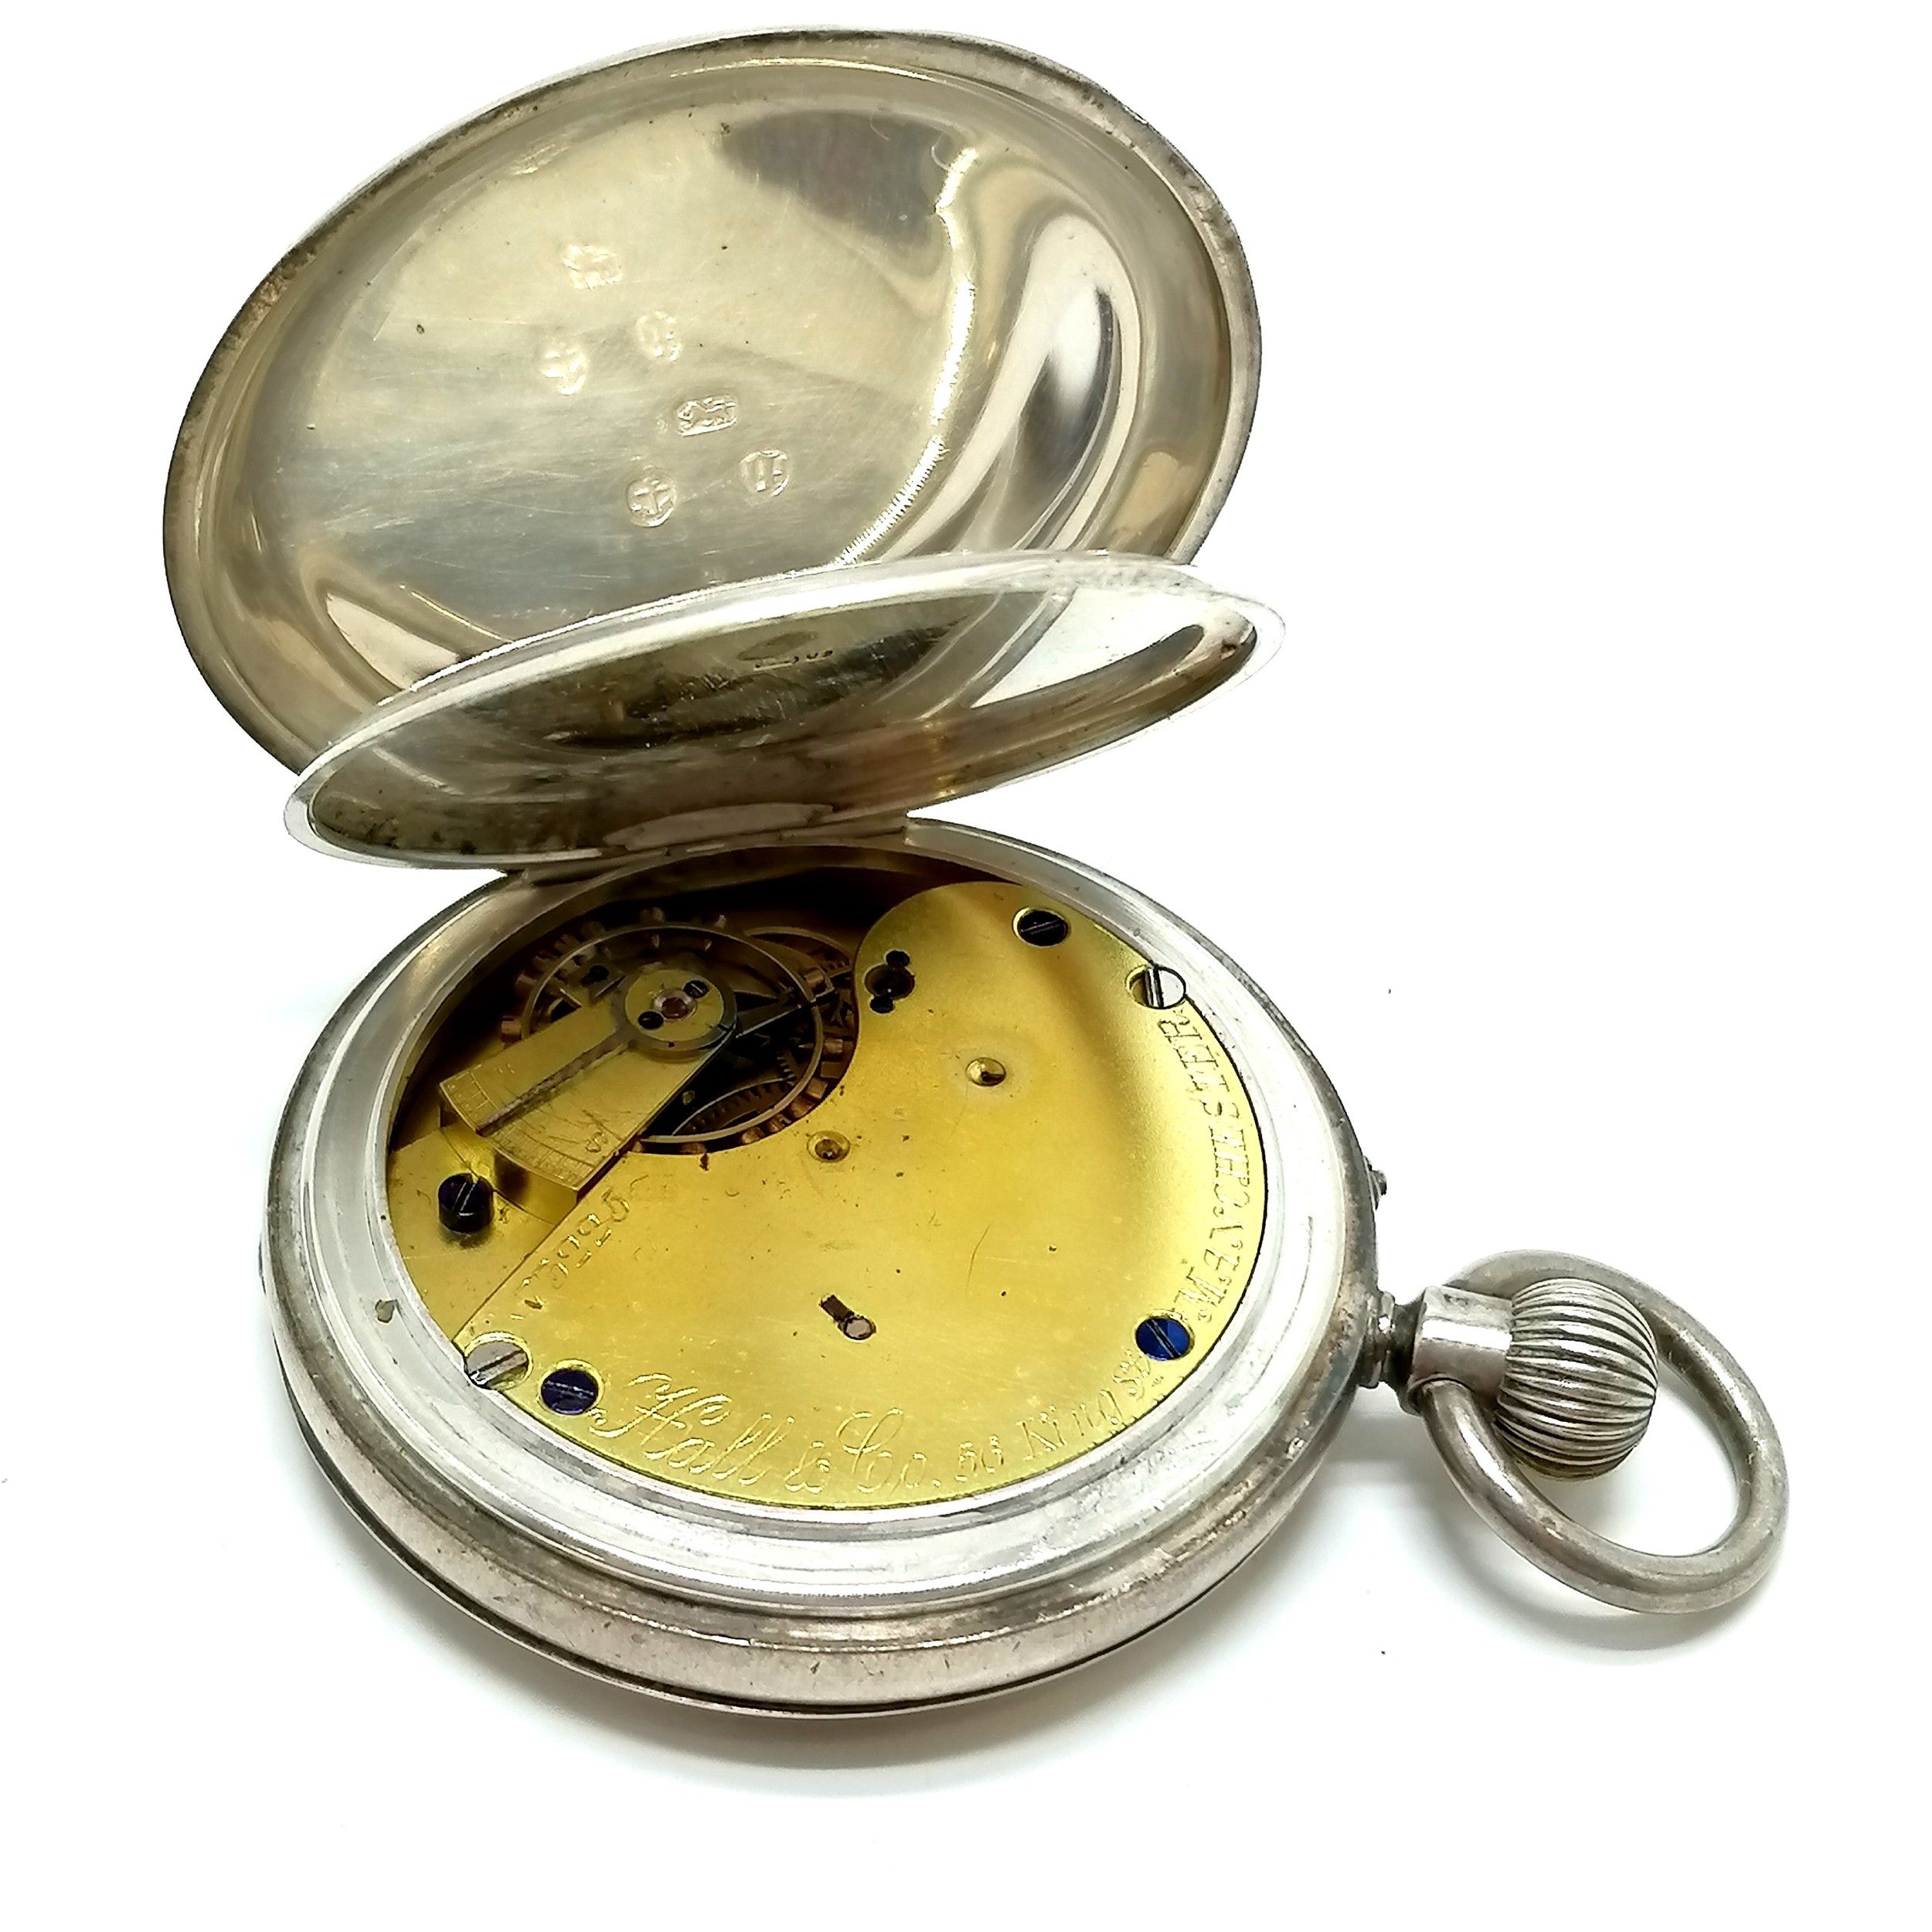 Antique silver full hunter pocket watch (48mm case) by Hall & Co (Manchester) in Parsons retail - Image 2 of 3